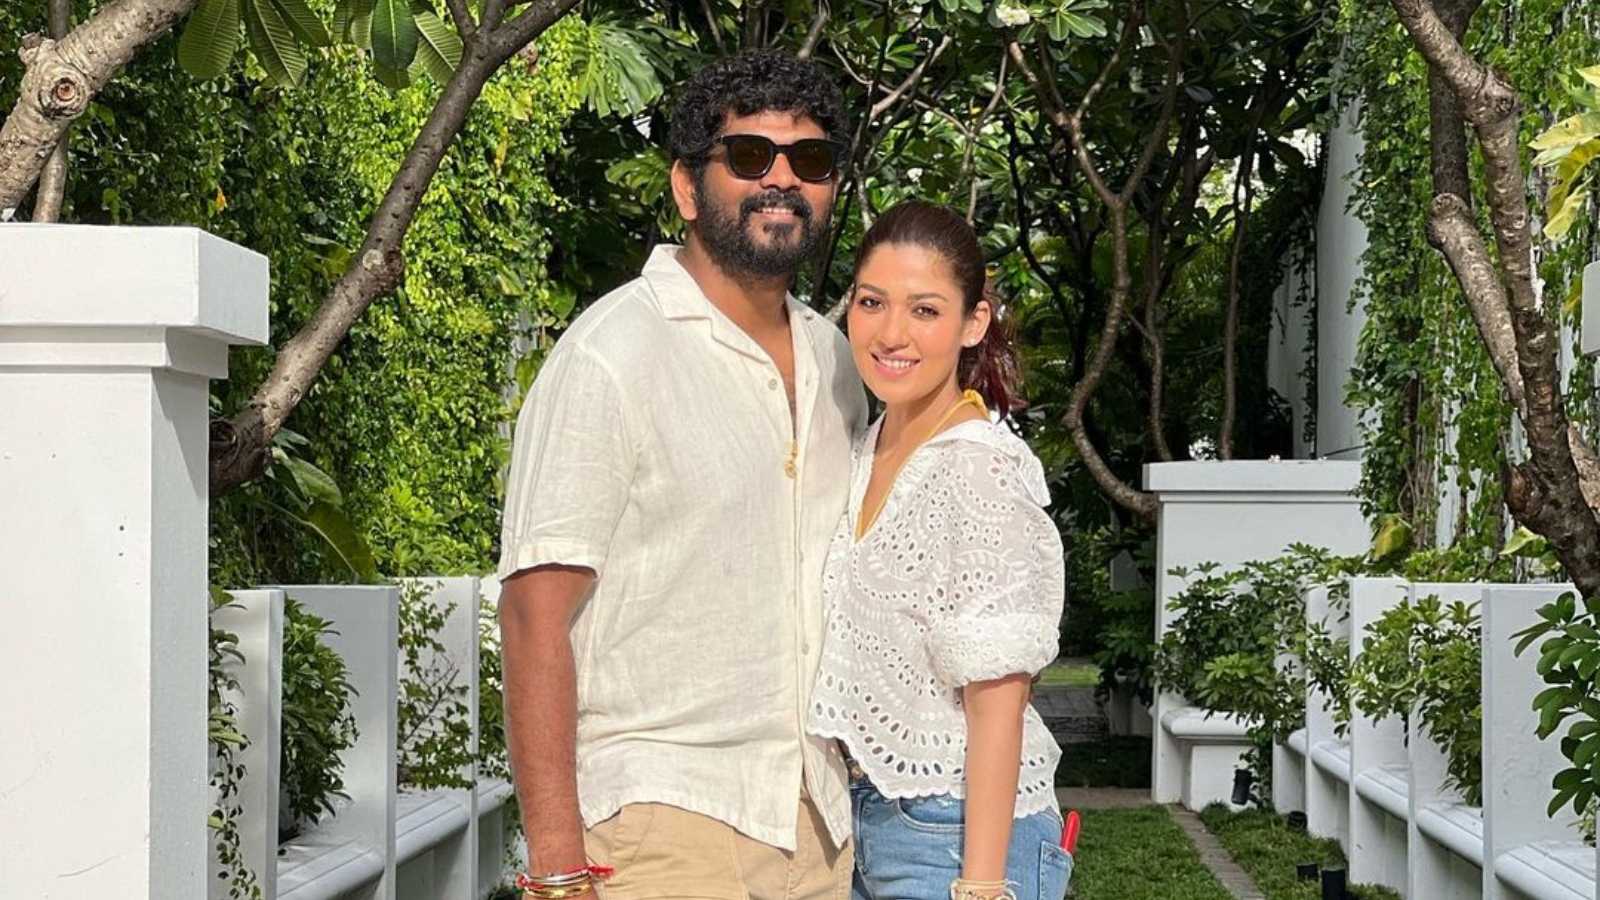 Nayanthara, Vignesh reveals they have been married for six years, as parenthood via surrogacy comes under question: reports